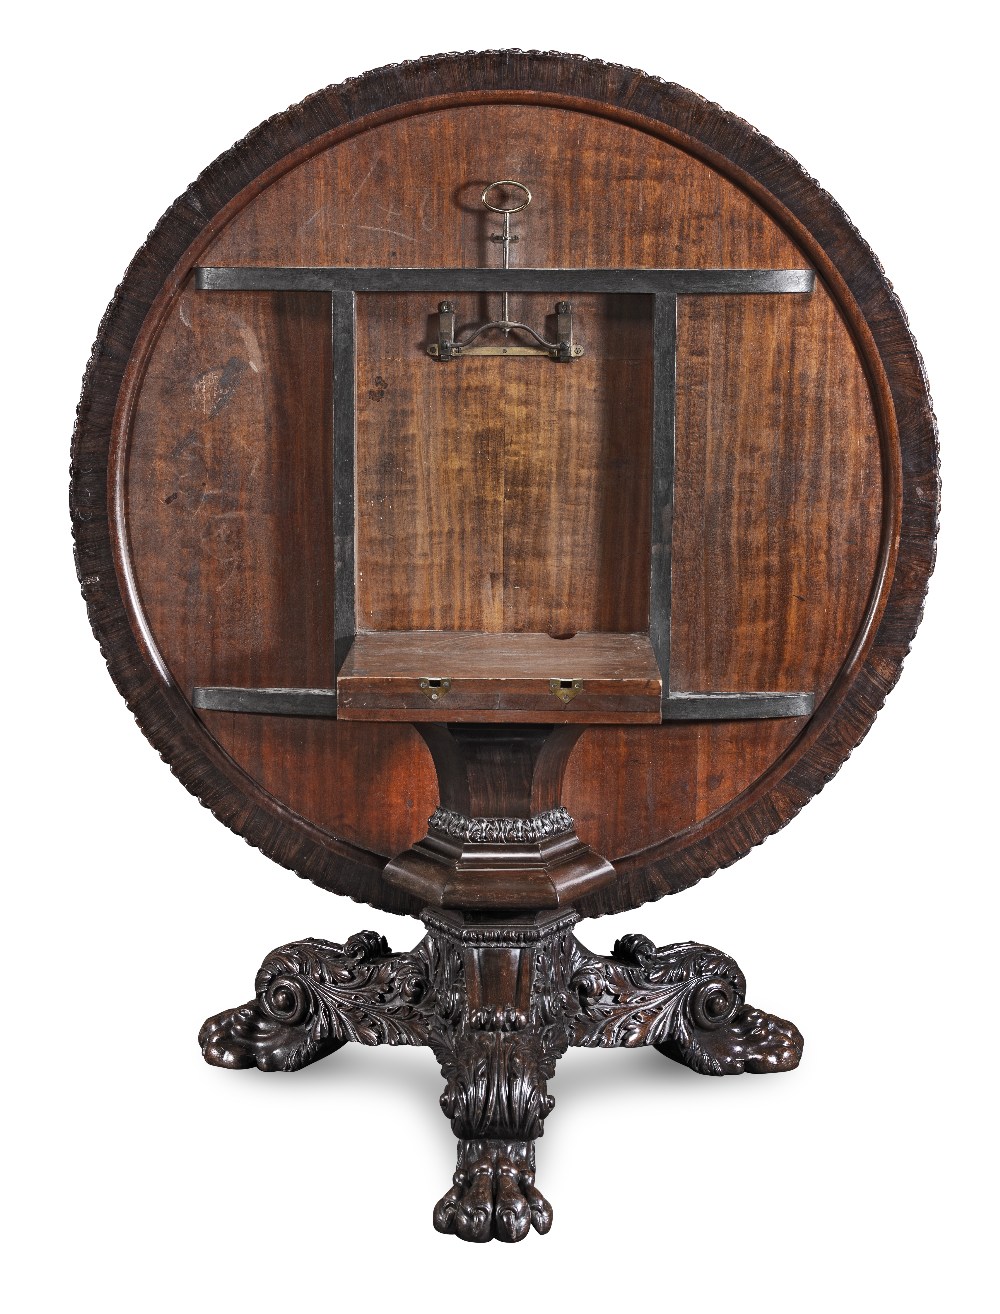 A GEORGE IV CARVED ROSEWOOD BREAKFAST OR CENTRE TABLE, ATTRIBUTED TO GILLOWS1825-1830 - Image 2 of 3